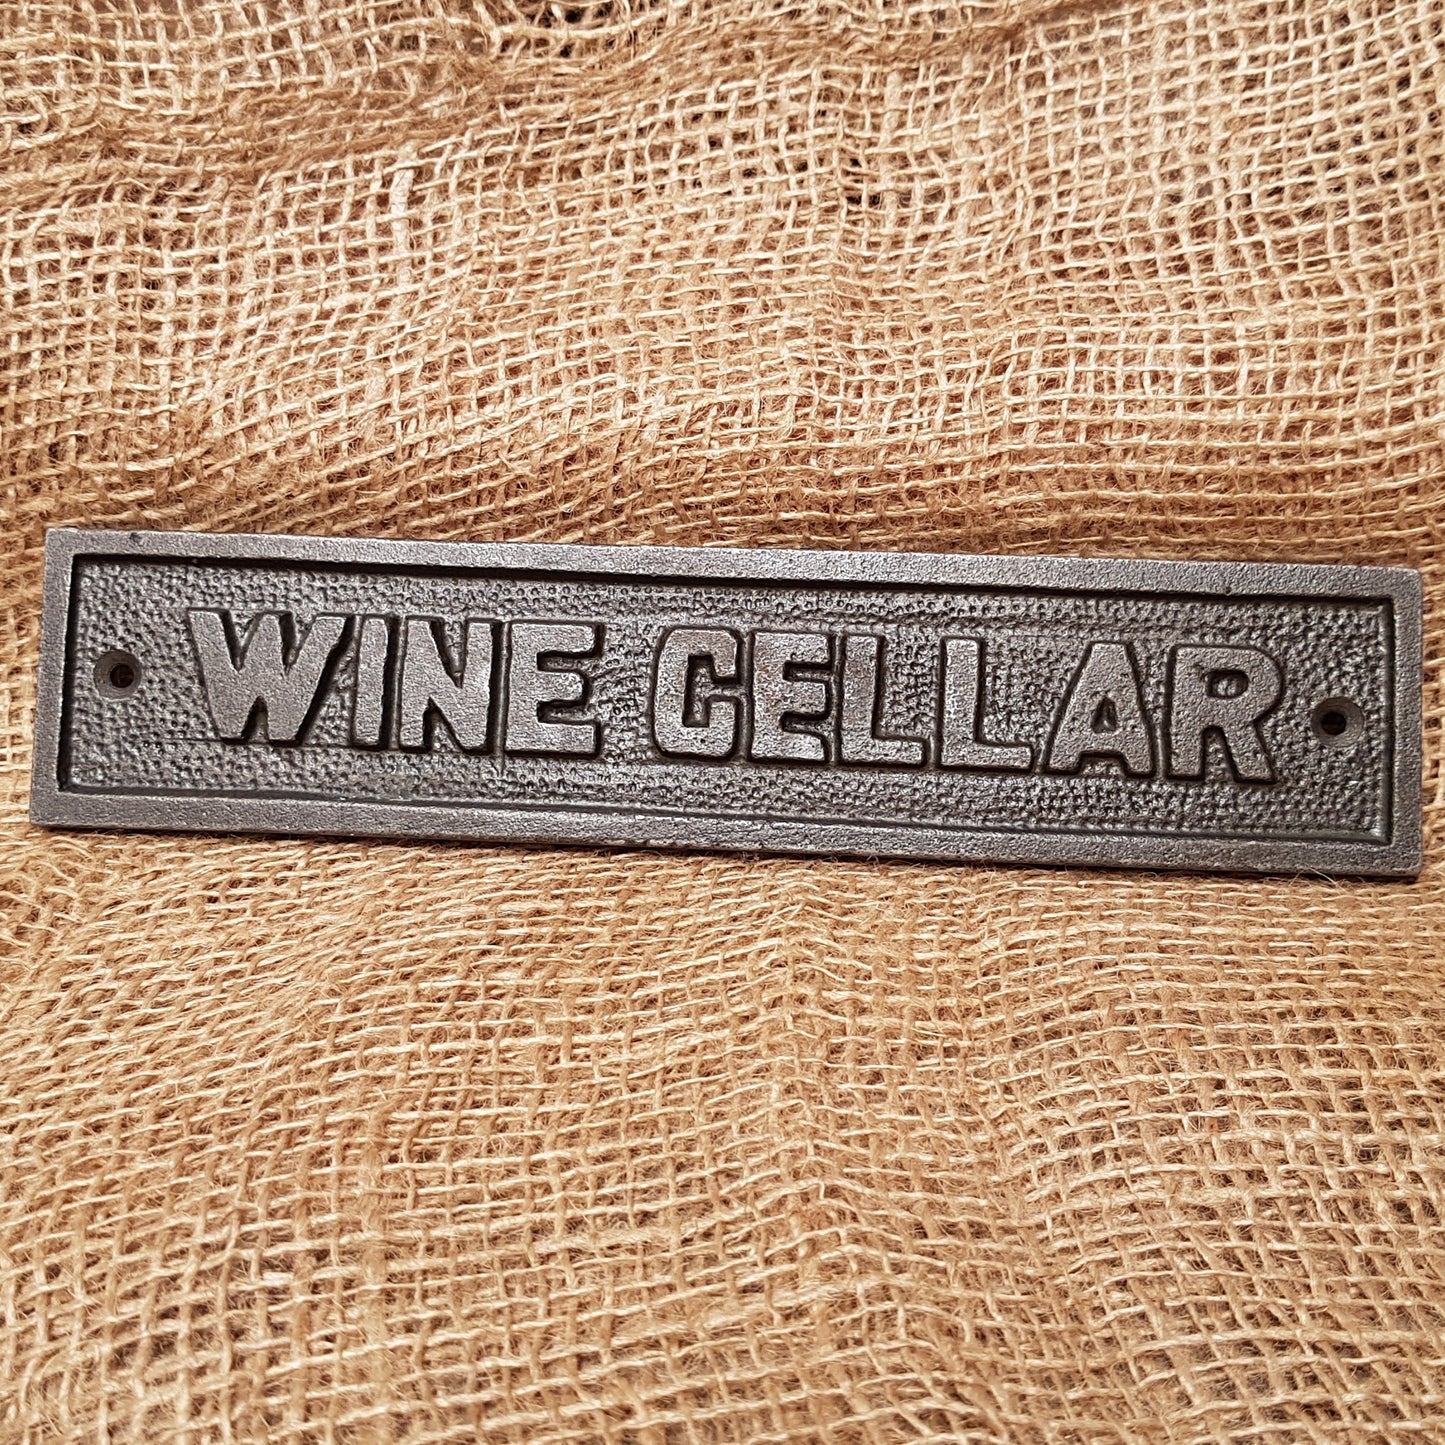 Wine Cellar - Spearhead Collection - Plaques and Signs - Gift Ideas, Home Decor, Plaques and Signs, The Man Cave, The Wine Cellar